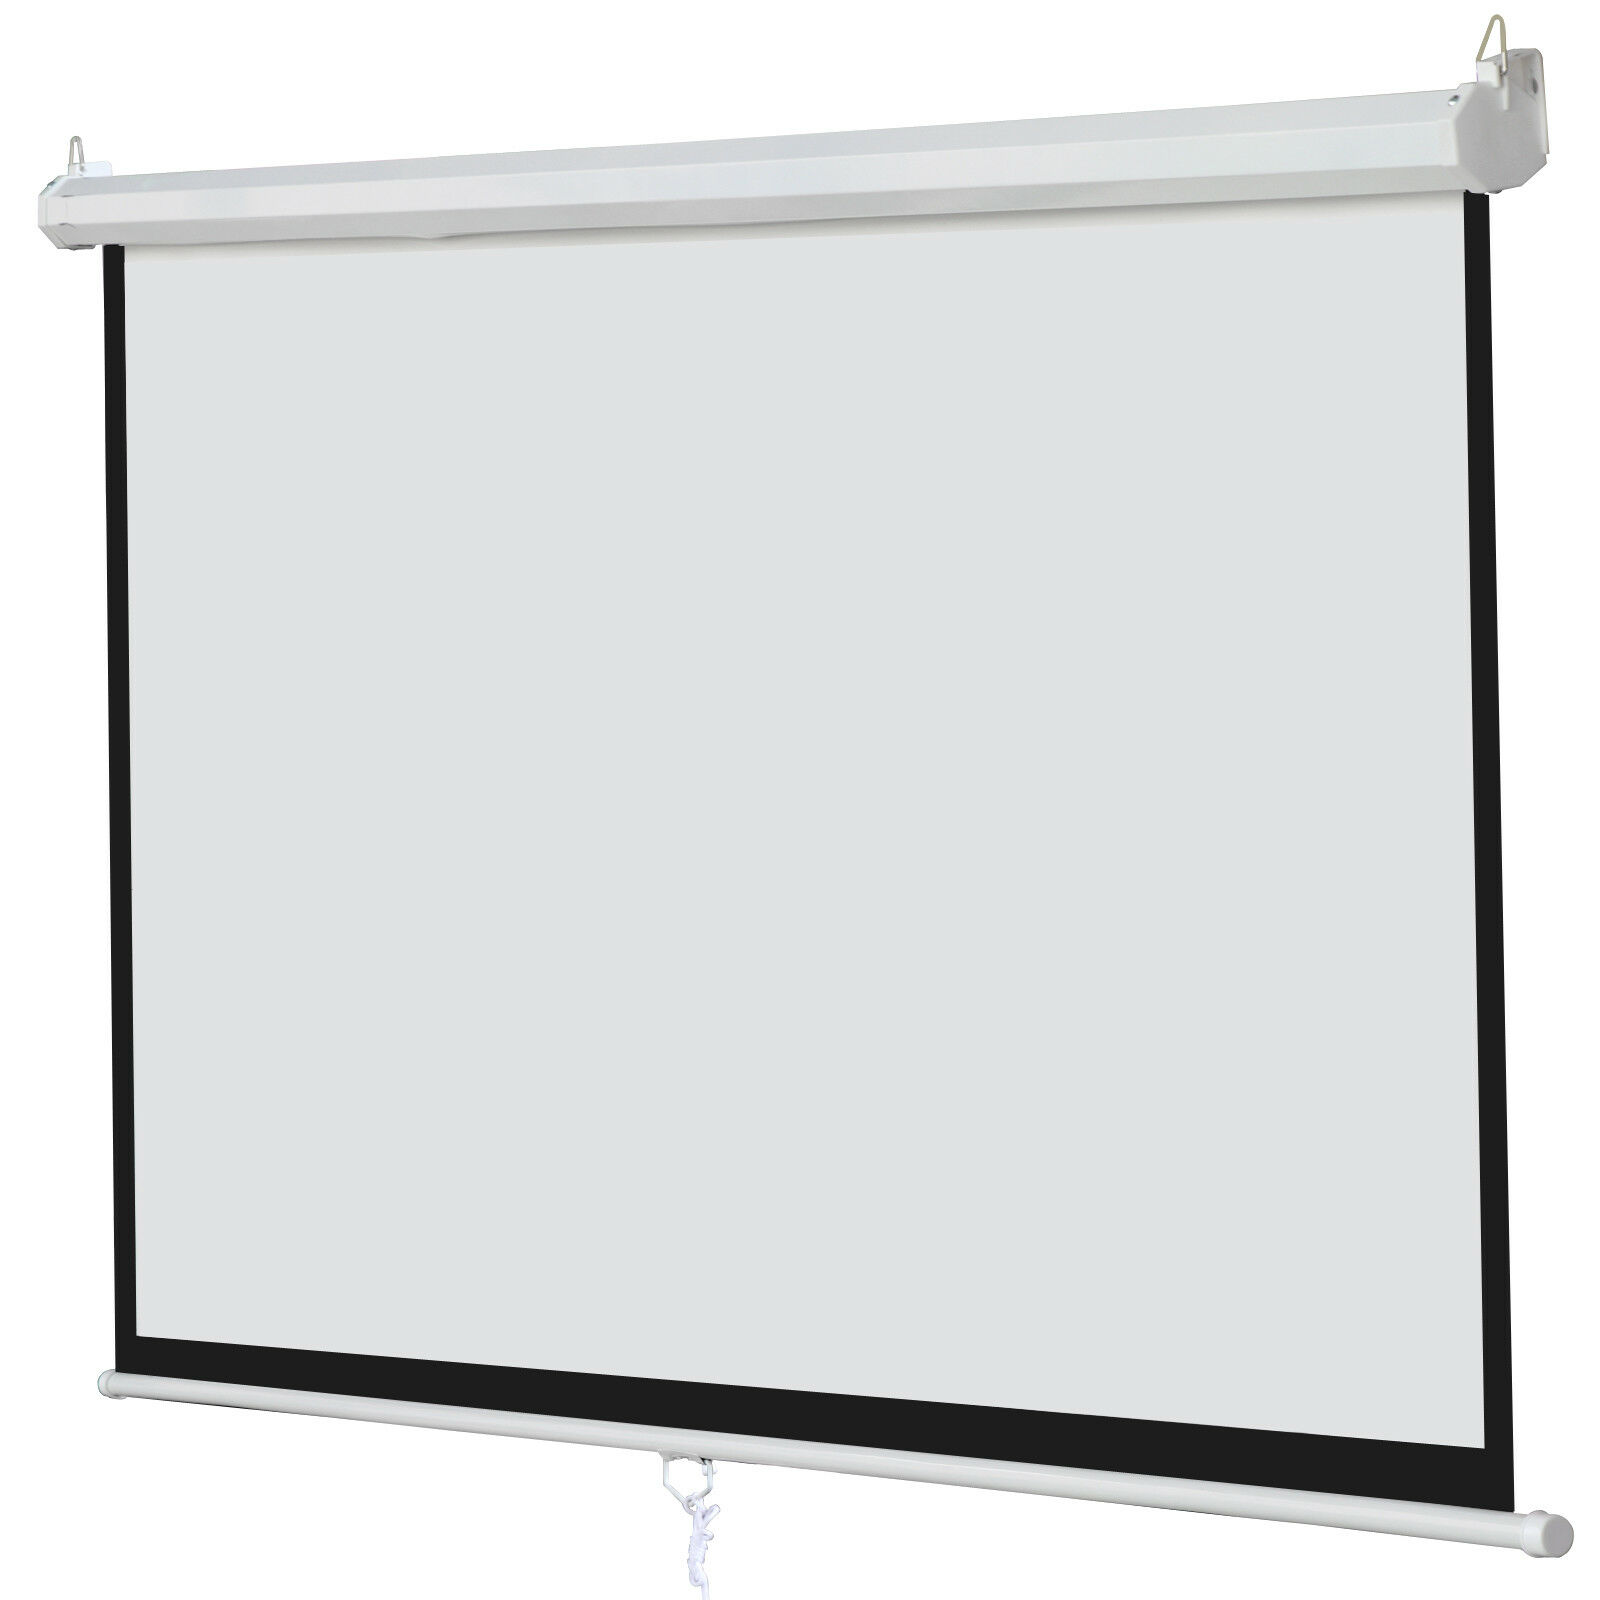 100 Inch Manual 16:9 Pull Down Projector Projection Screen Home Theater Movie